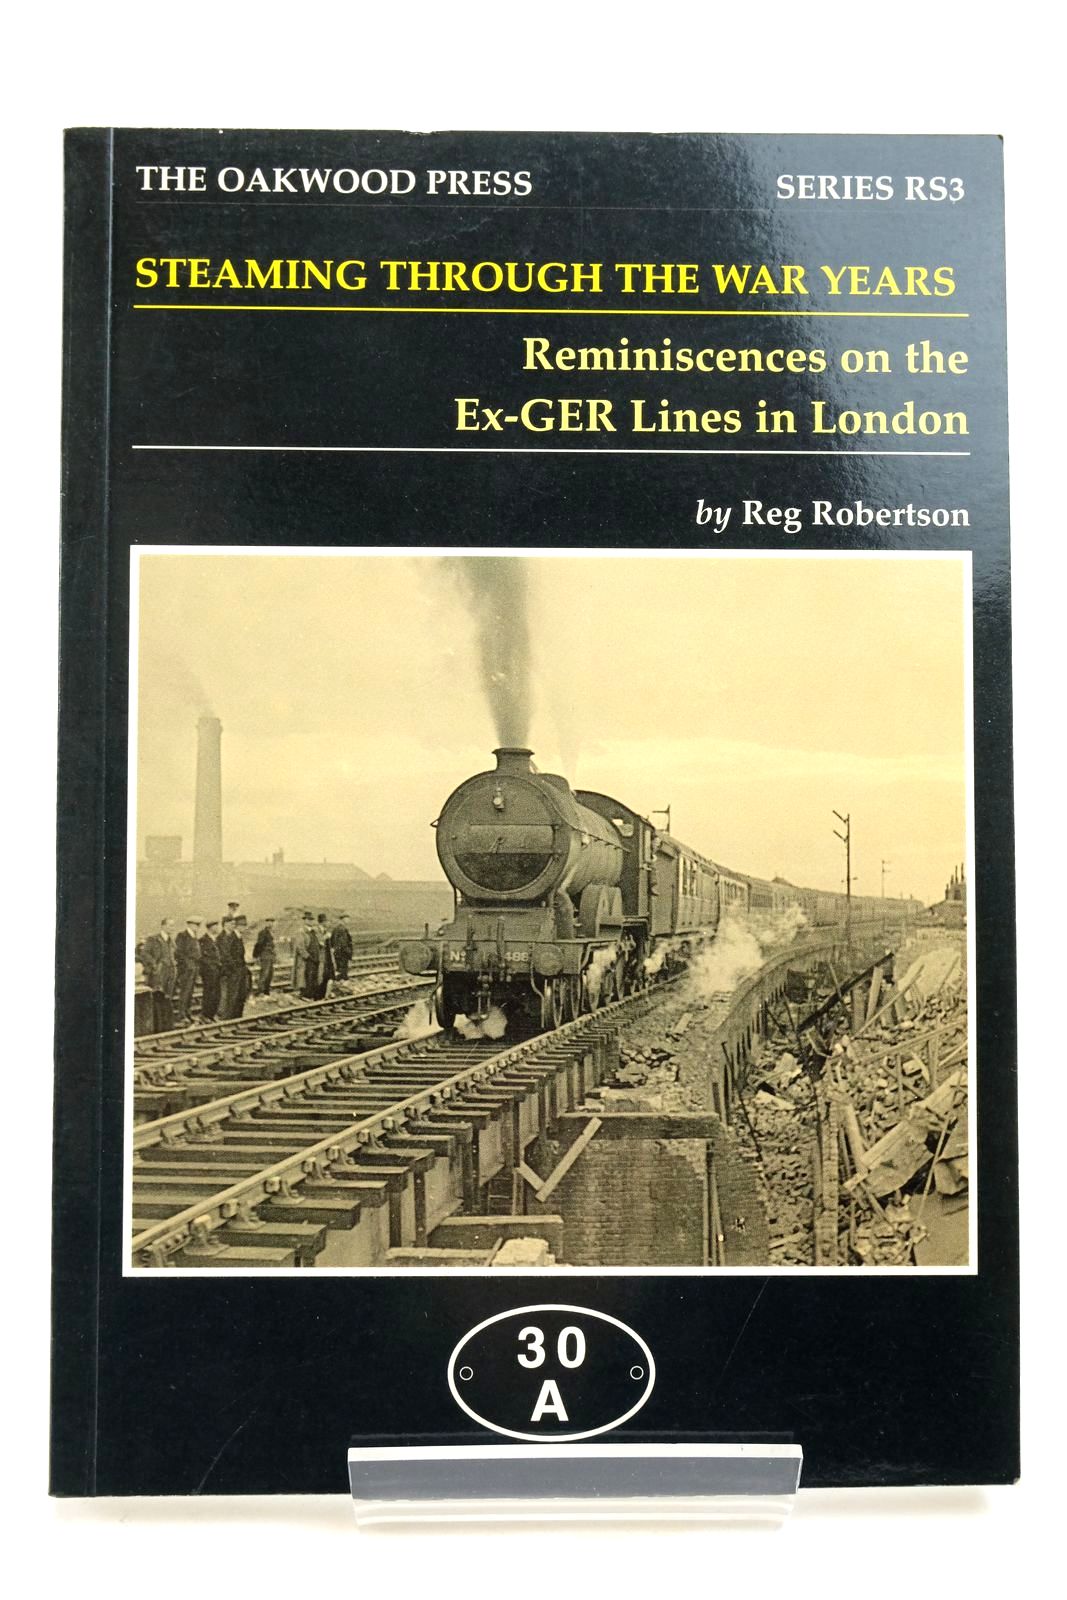 Photo of STEAMING THROUGH THE WAR YEARS REMINISCENCES THE EX-GER LINES IN LONDON written by Robertson, Reg published by The Oakwood Press (STOCK CODE: 2140807)  for sale by Stella & Rose's Books